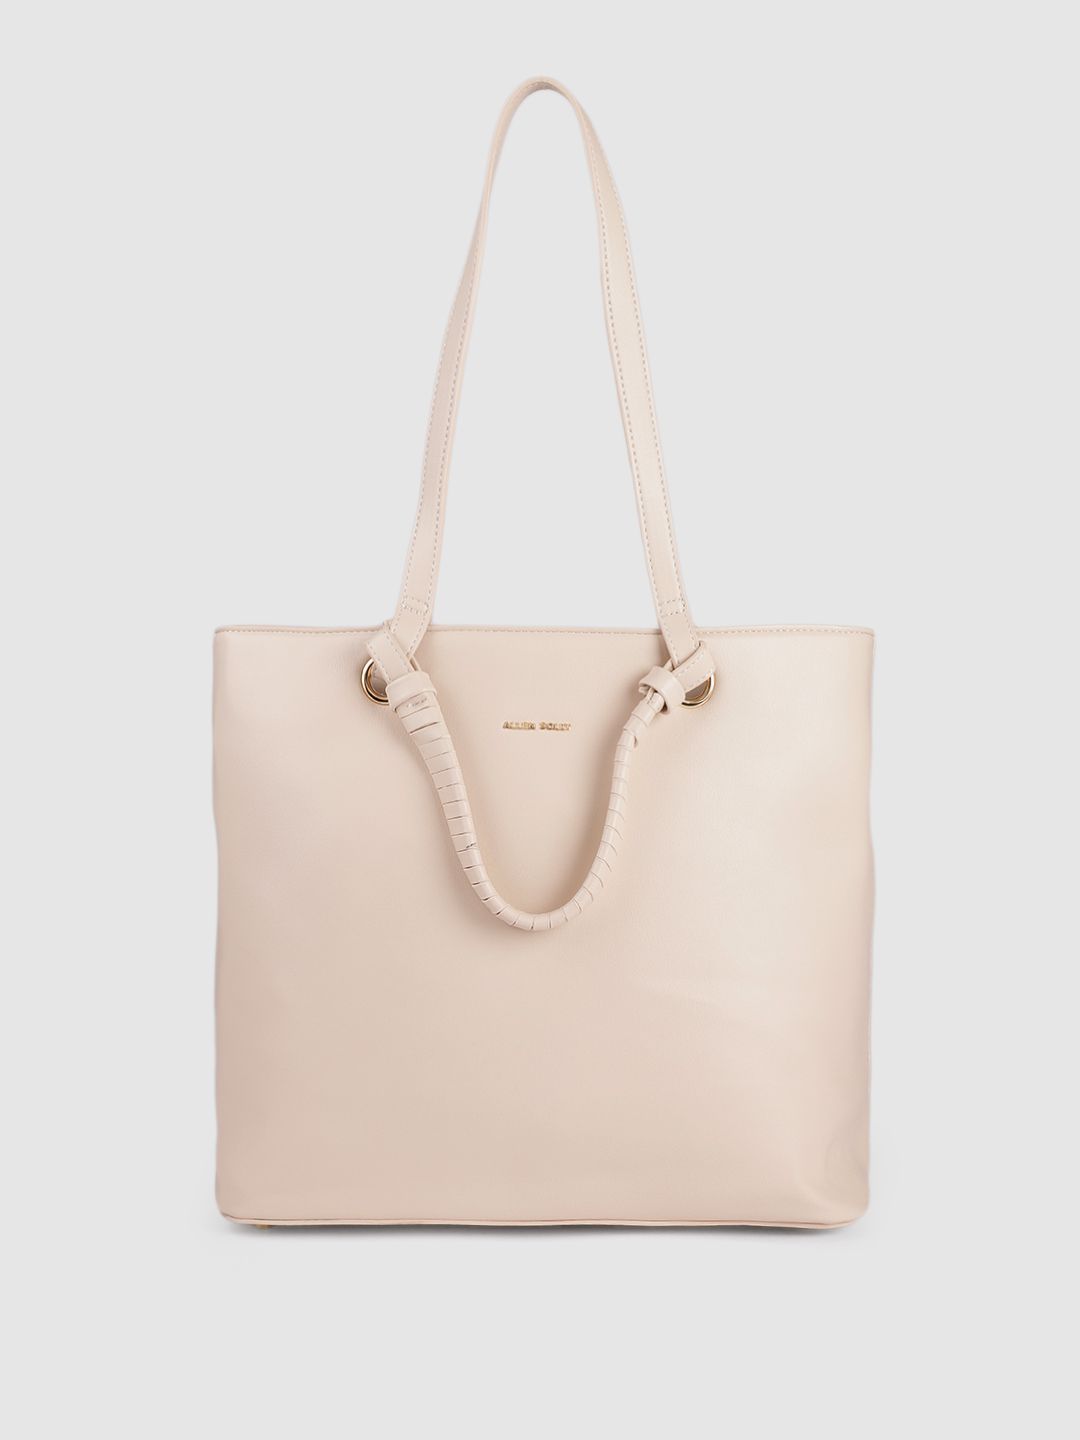 Allen Solly Nude-Coloured Solid Structured Shoulder Bag Price in India